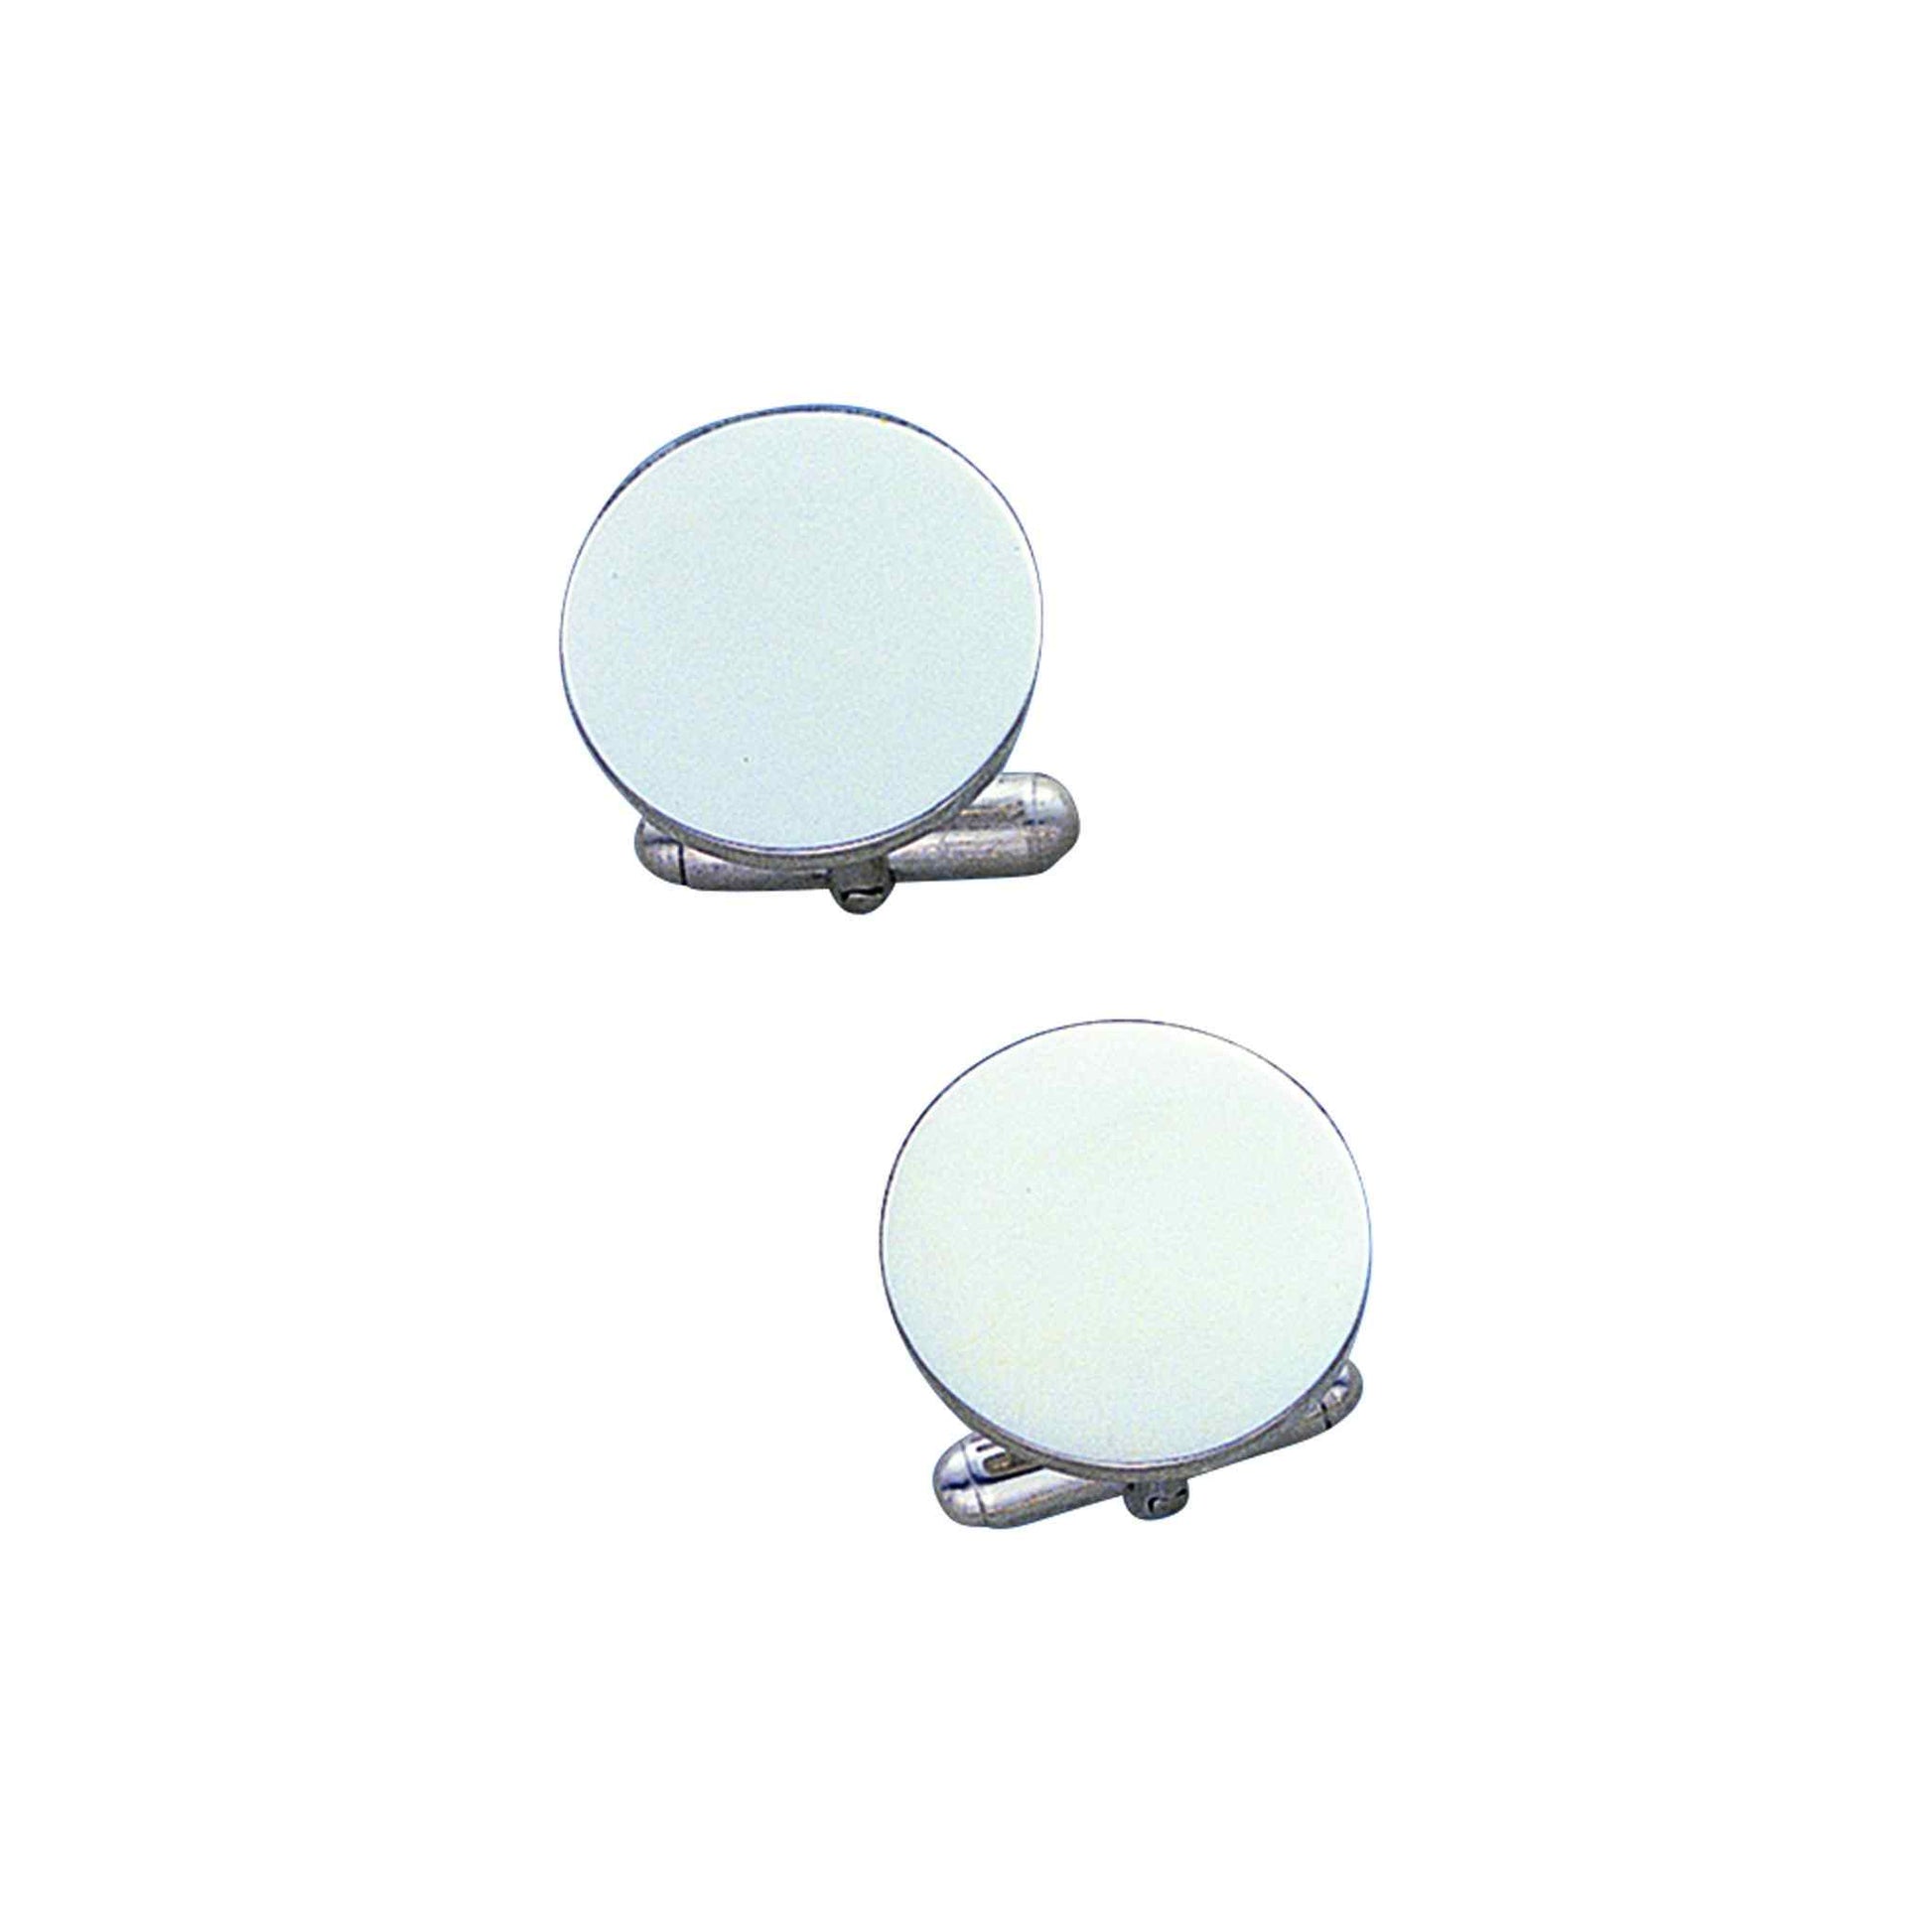 A sterling silver round 18mm polished cufflinks displayed on a neutral white background.